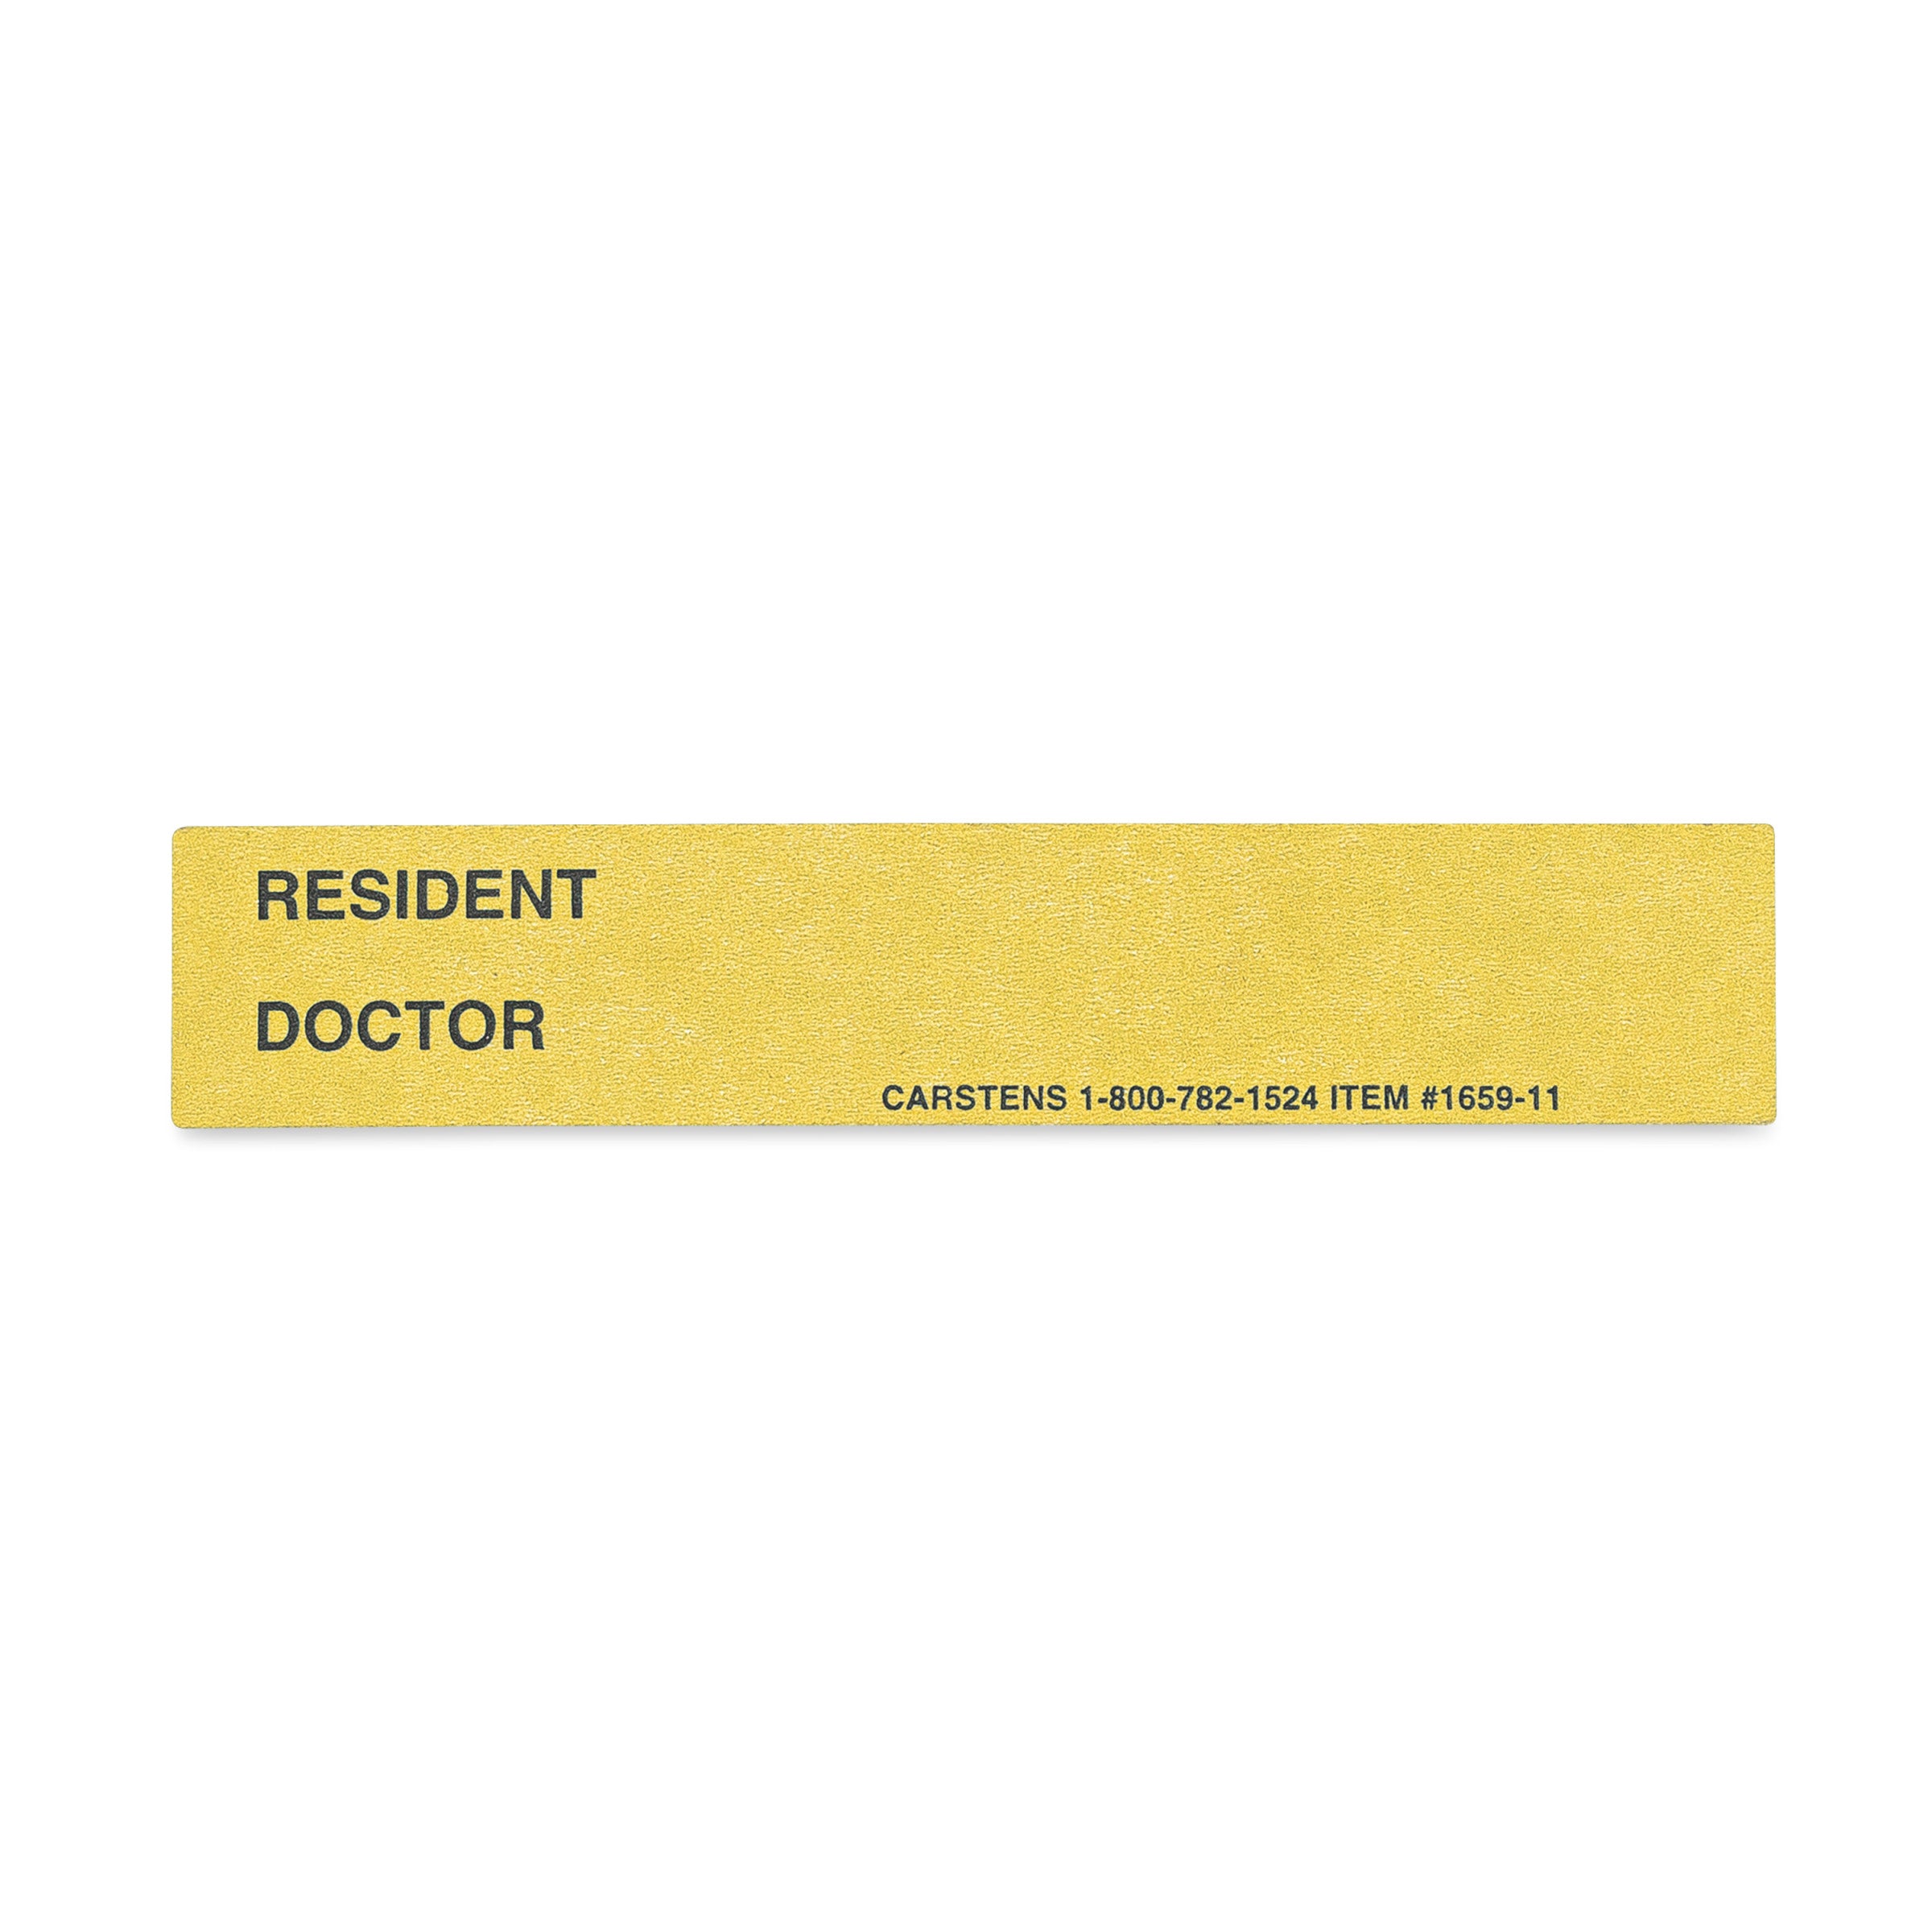 Resident / Doctor Preprinted ID Cards for 1.5 – 4” Ring Binder Spines - Pack of 100